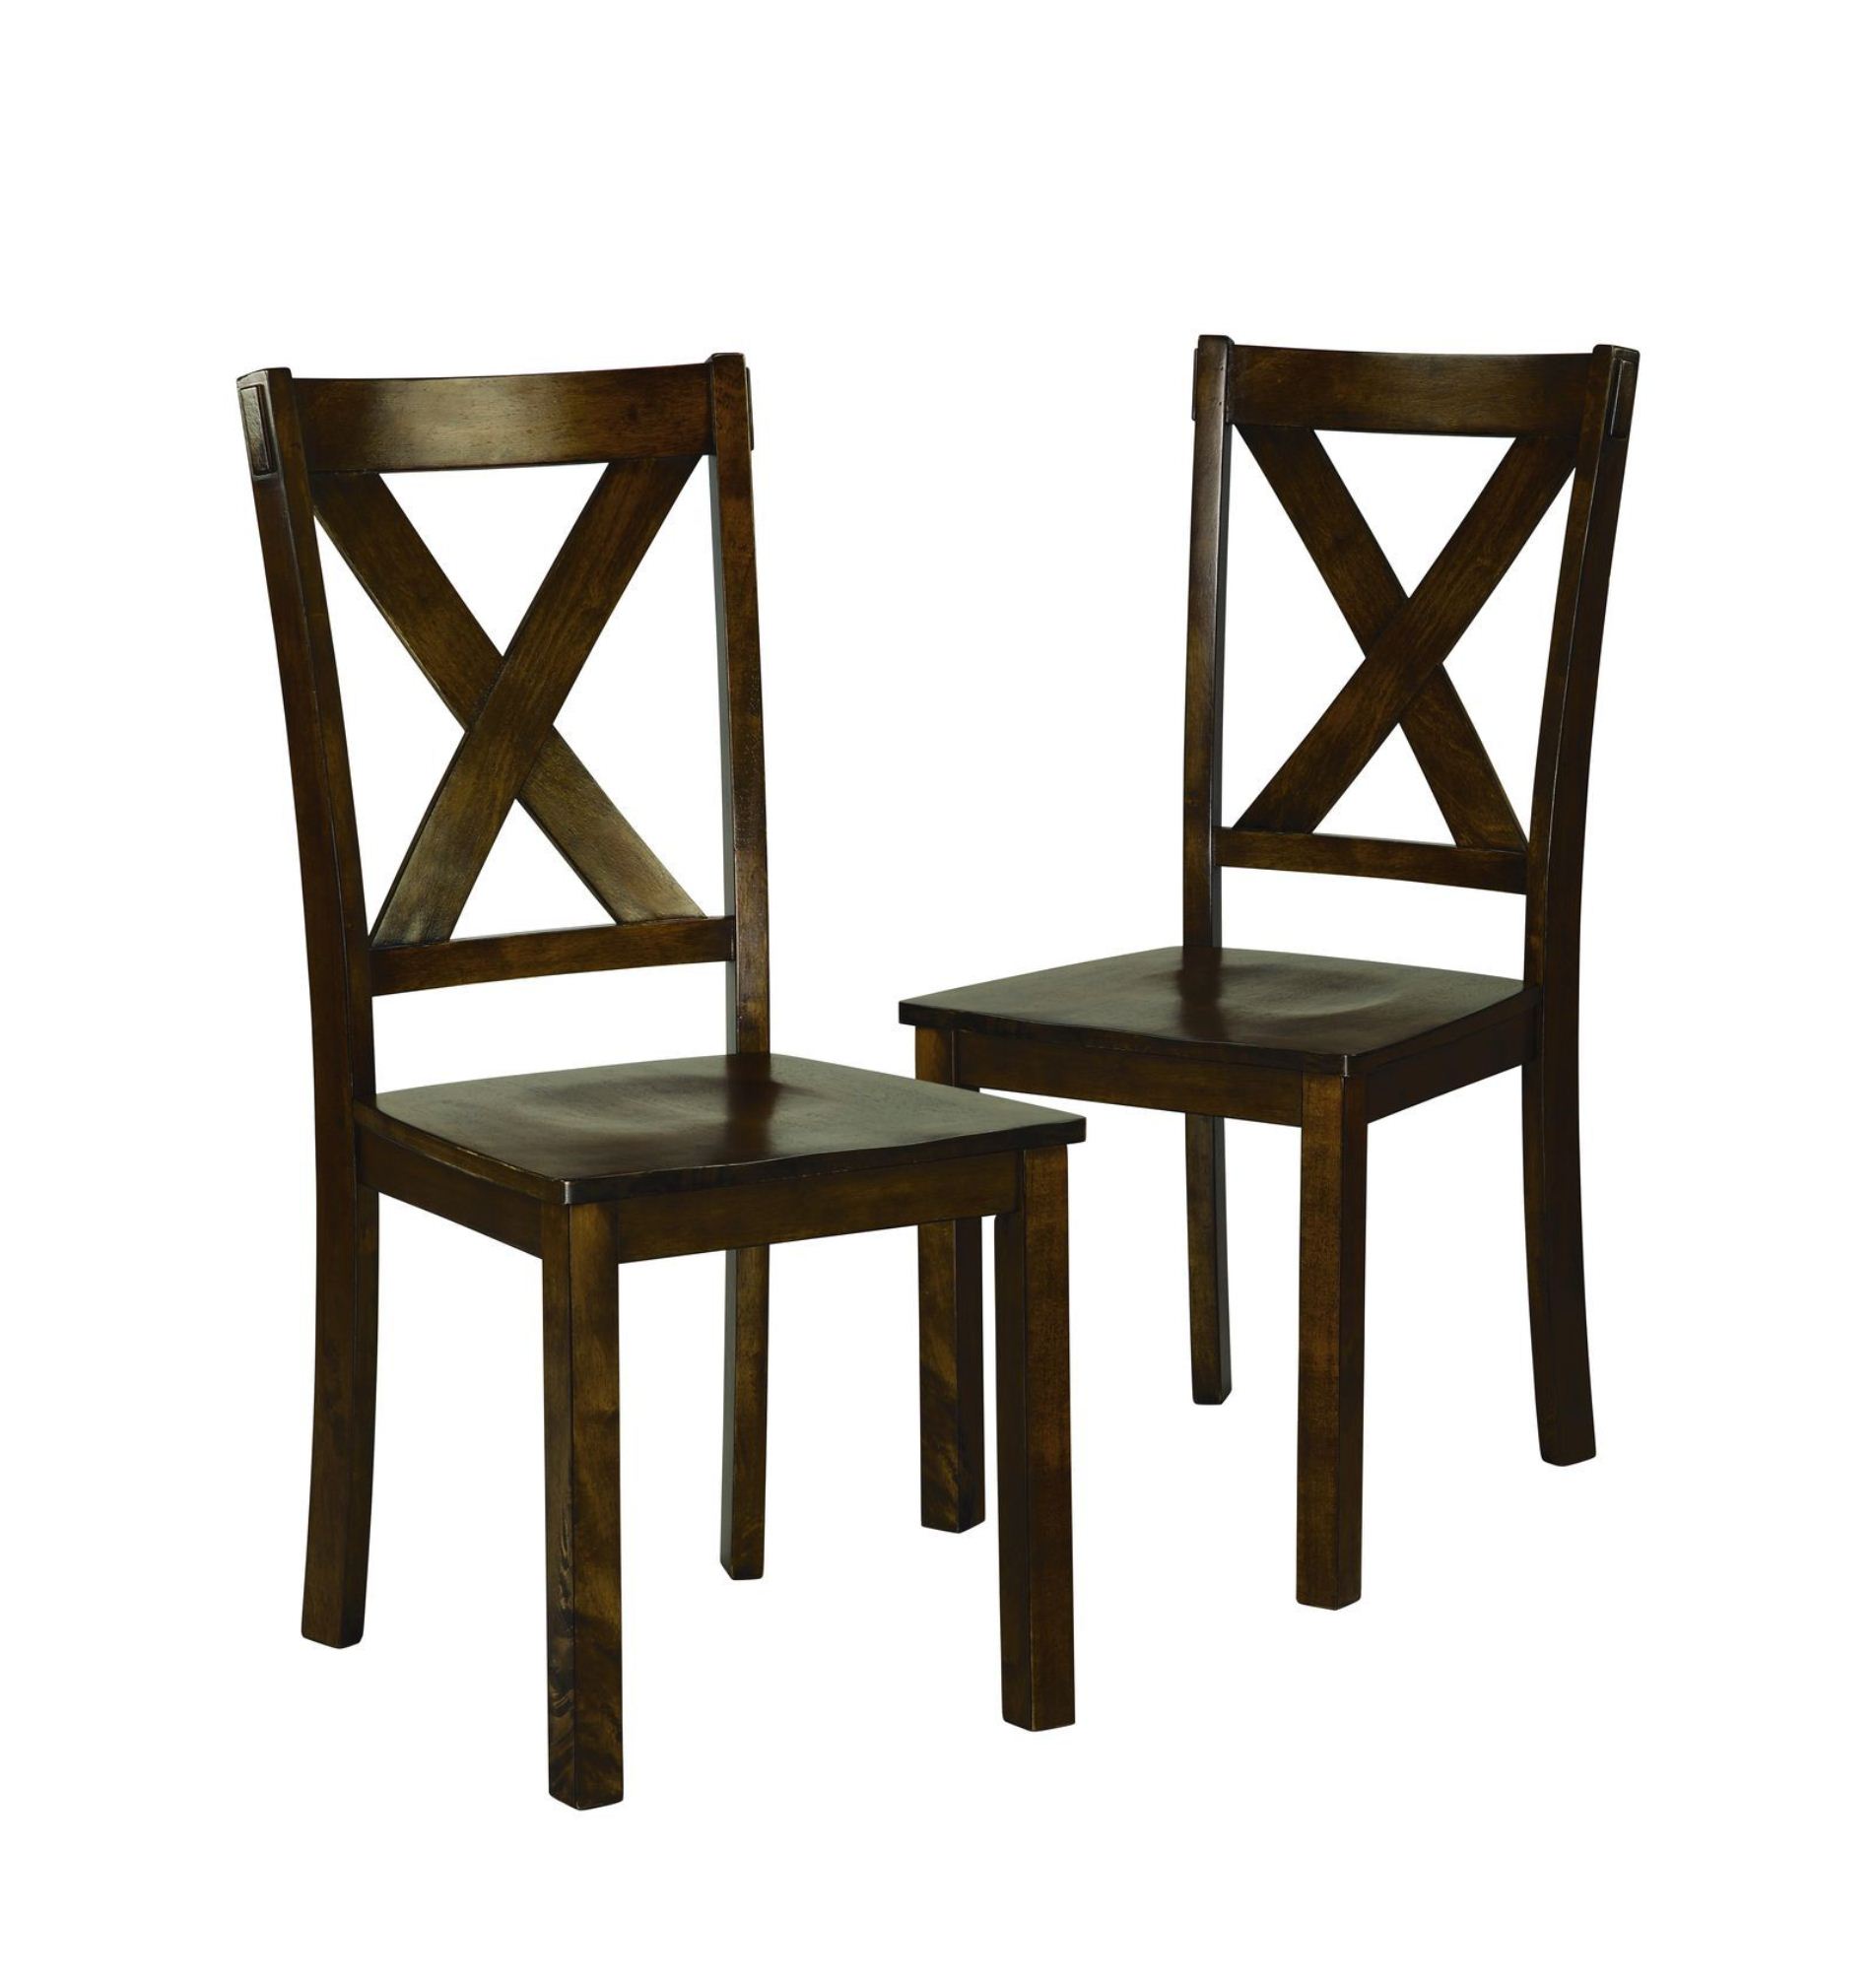 Pc Kendall Dining Chair Set, Sears Dining Room Sets